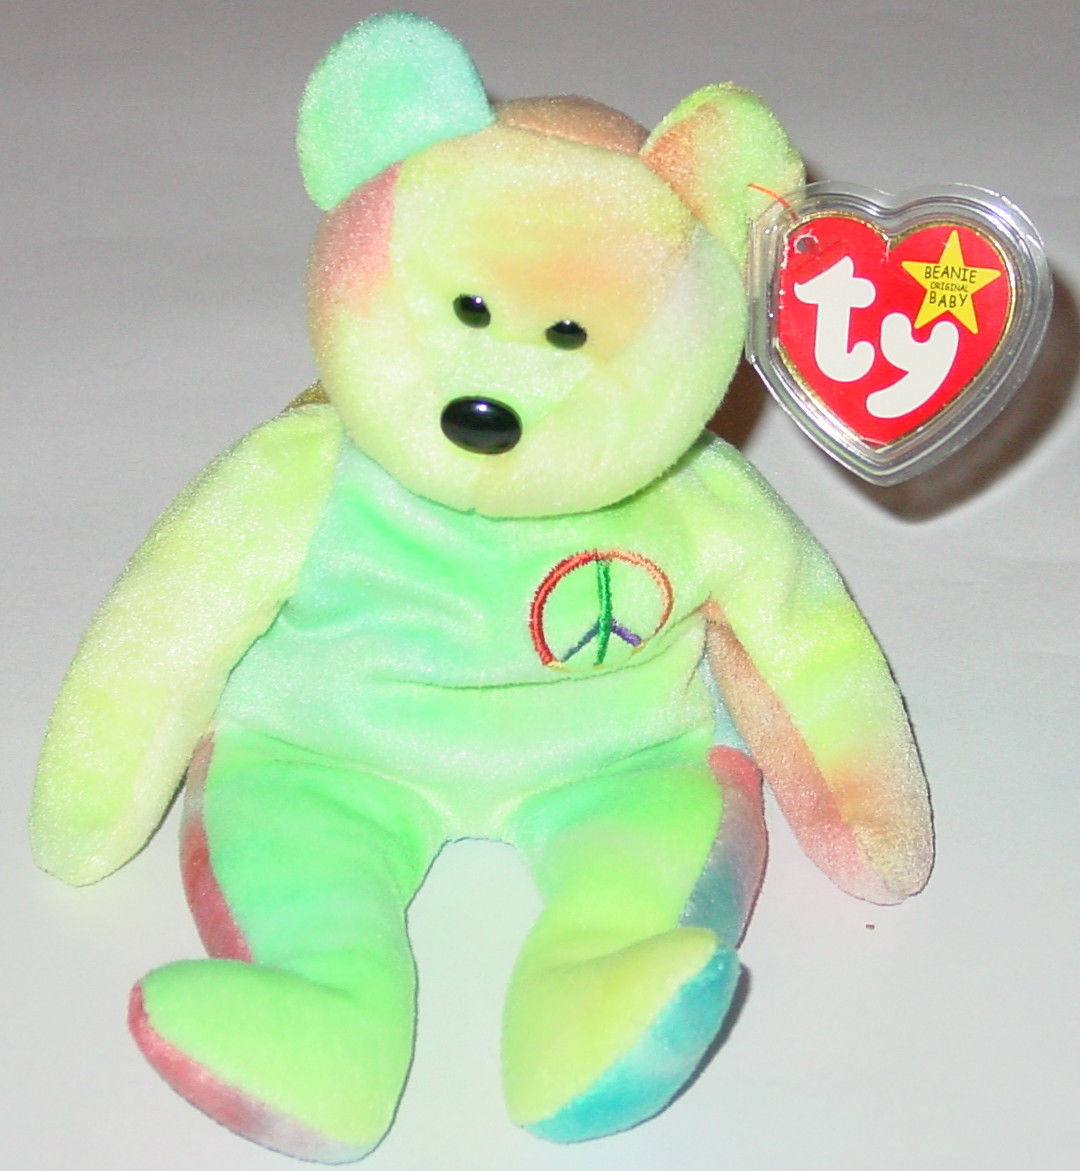 4th generation peace beanie baby